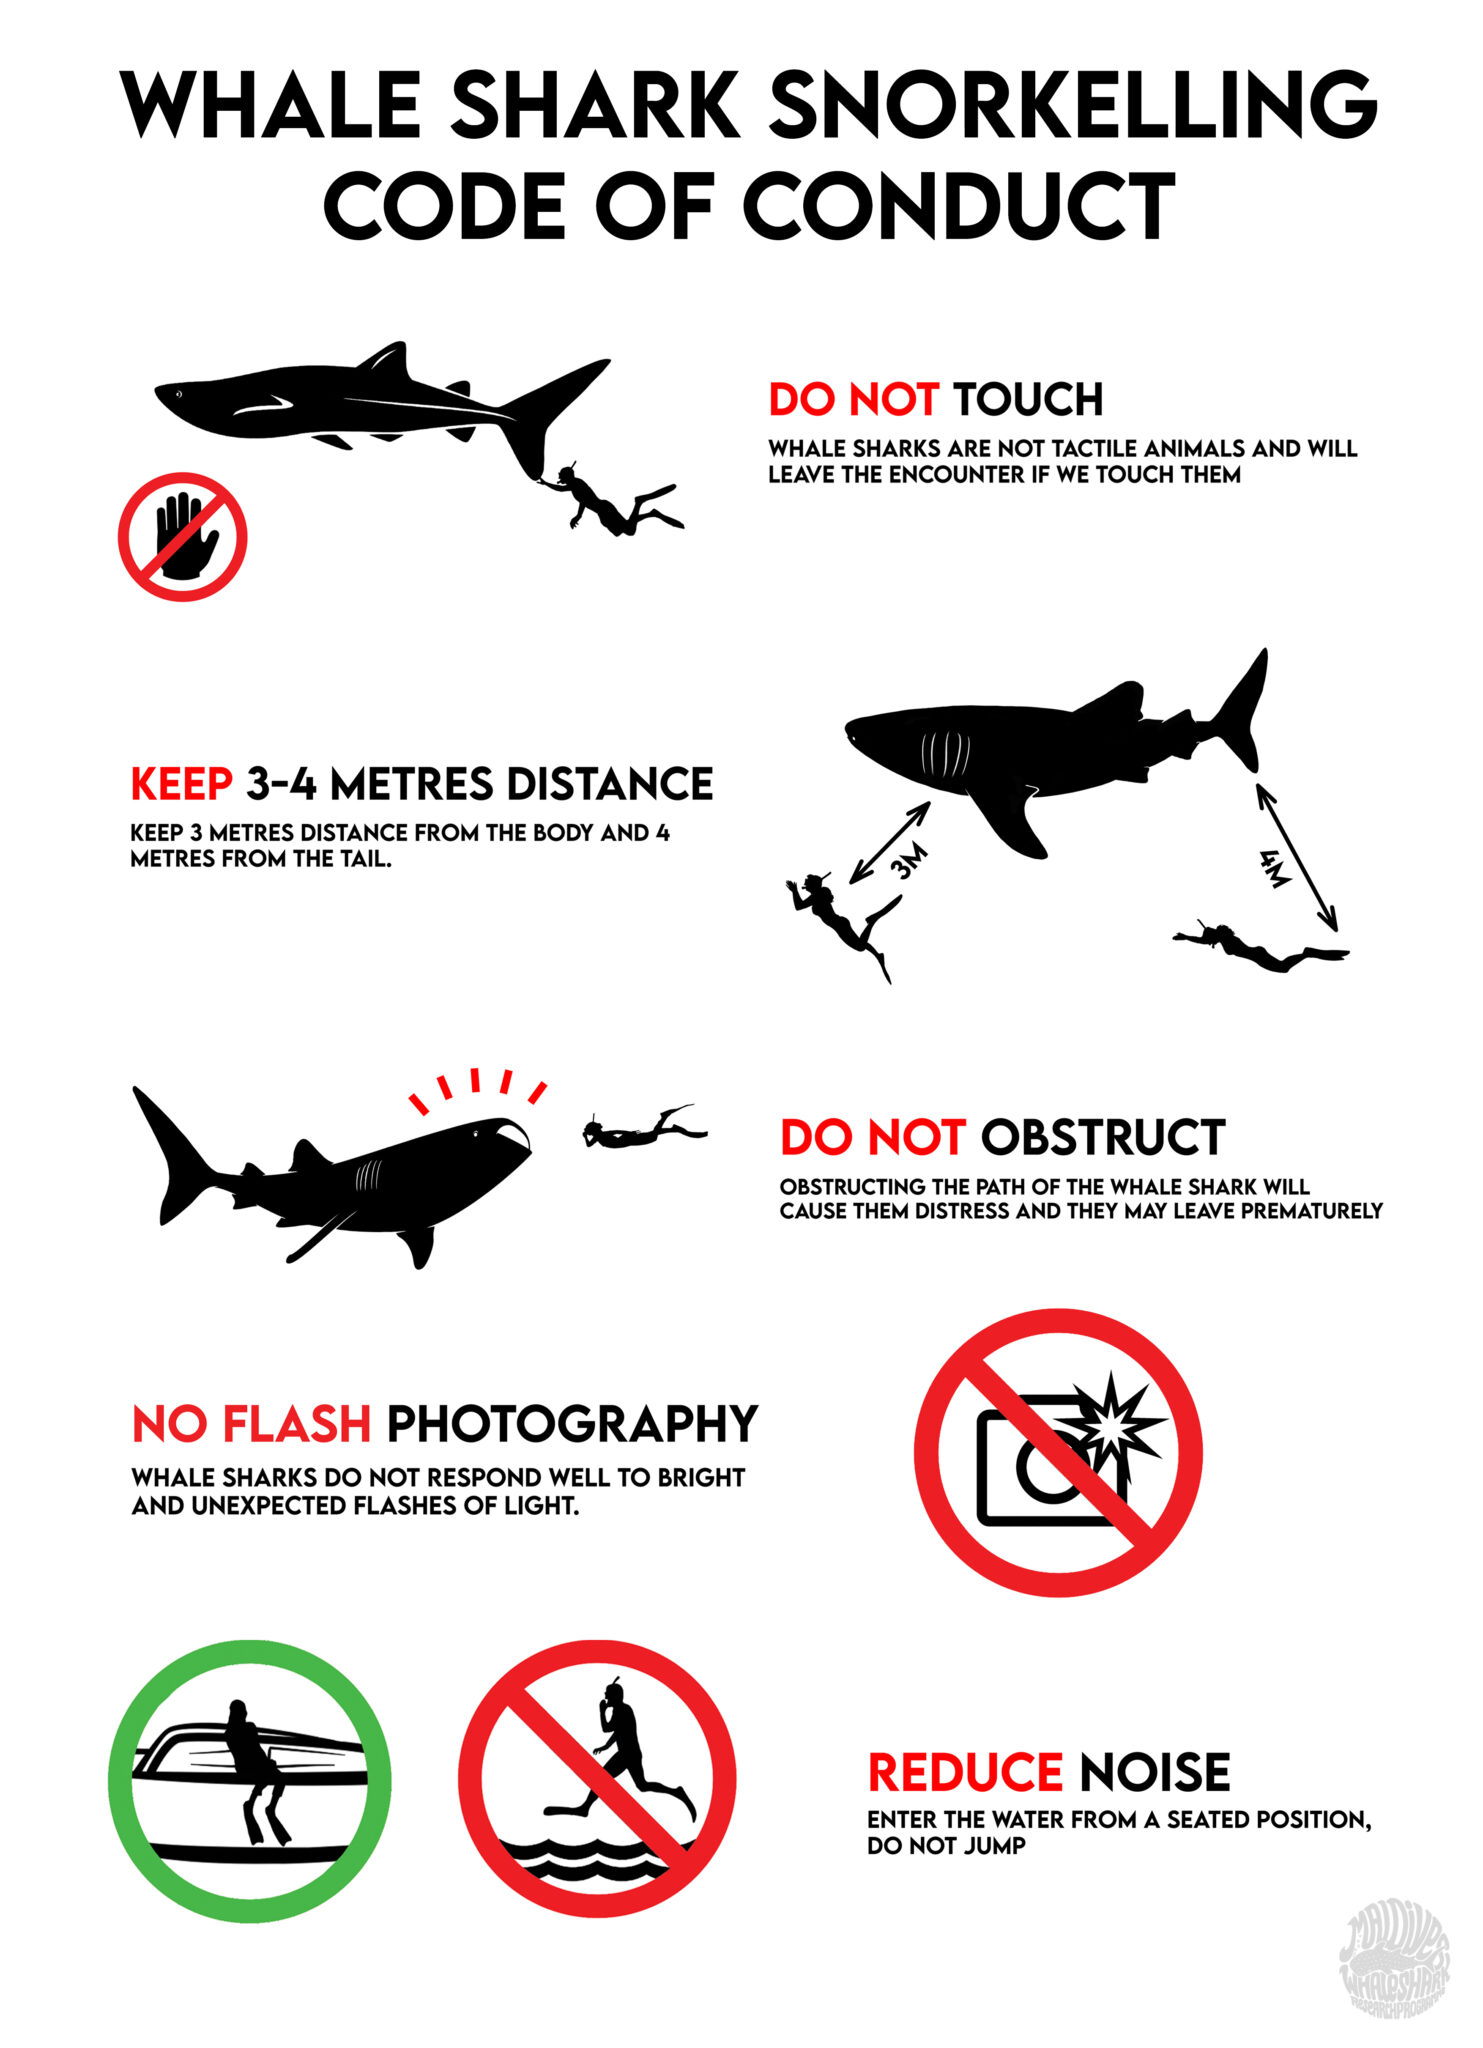 maldives whale shark programme code of conduct